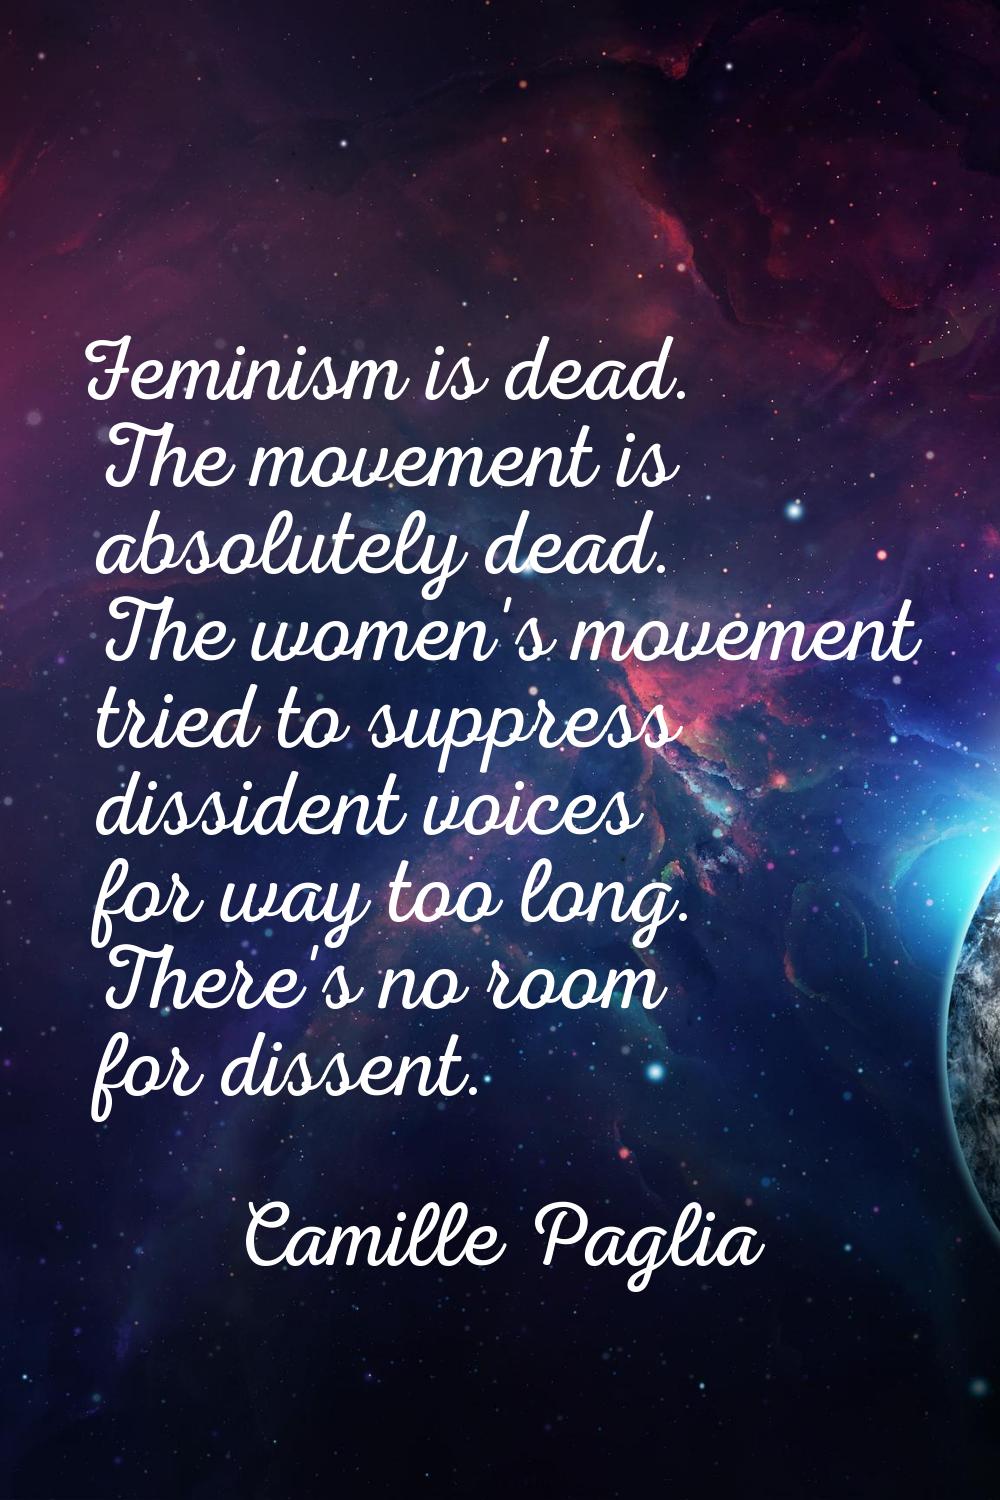 Feminism is dead. The movement is absolutely dead. The women's movement tried to suppress dissident